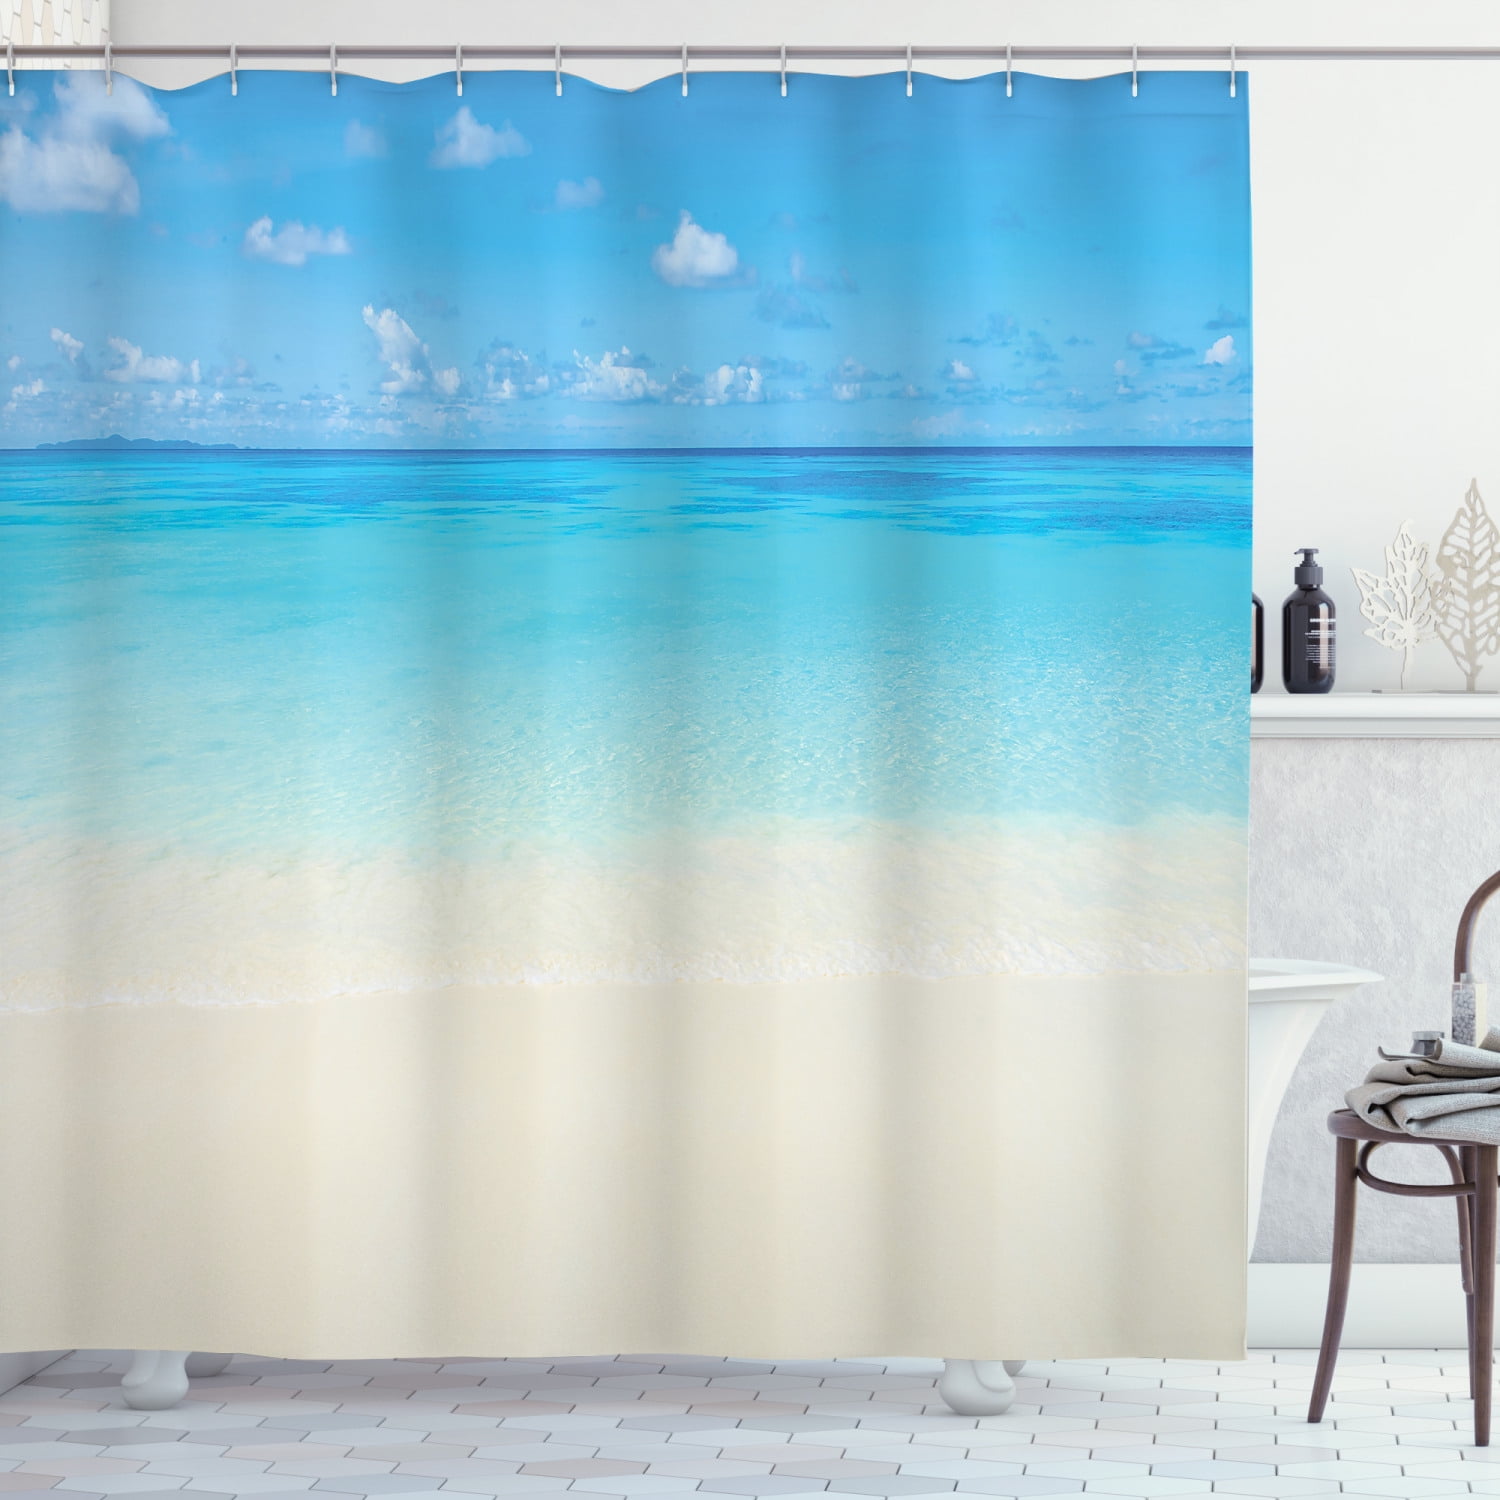 Shower Curtain Liner with Hooks Set Bathroom Supply 71x71 inch Marine Theme 